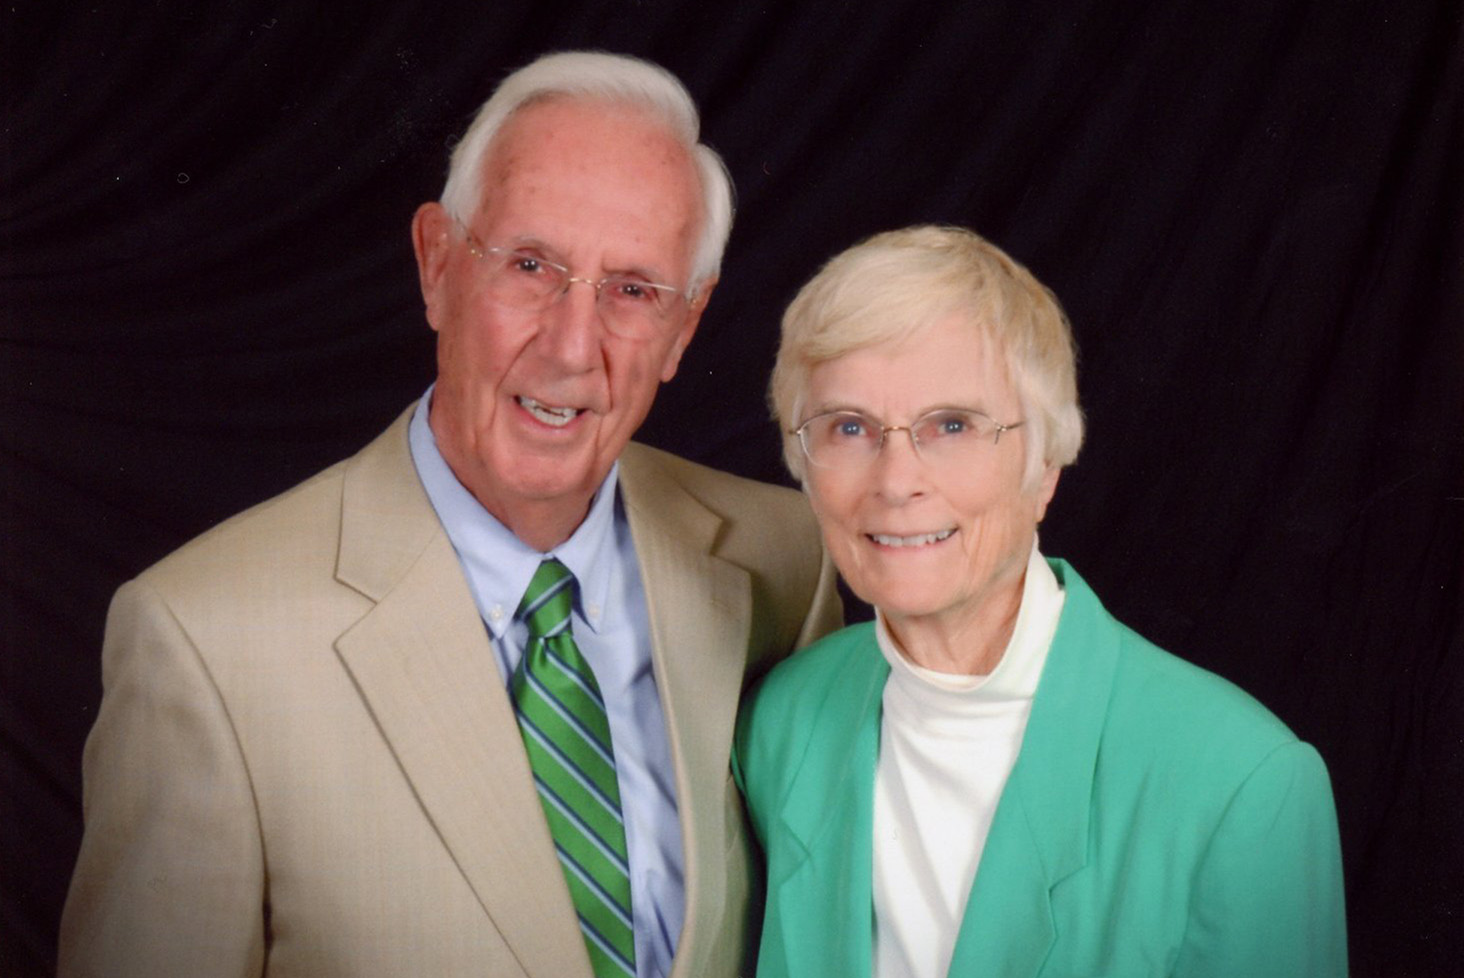 A head-and-shoulders professional portrait of Dr. George H. Conner and Betty R. Conner